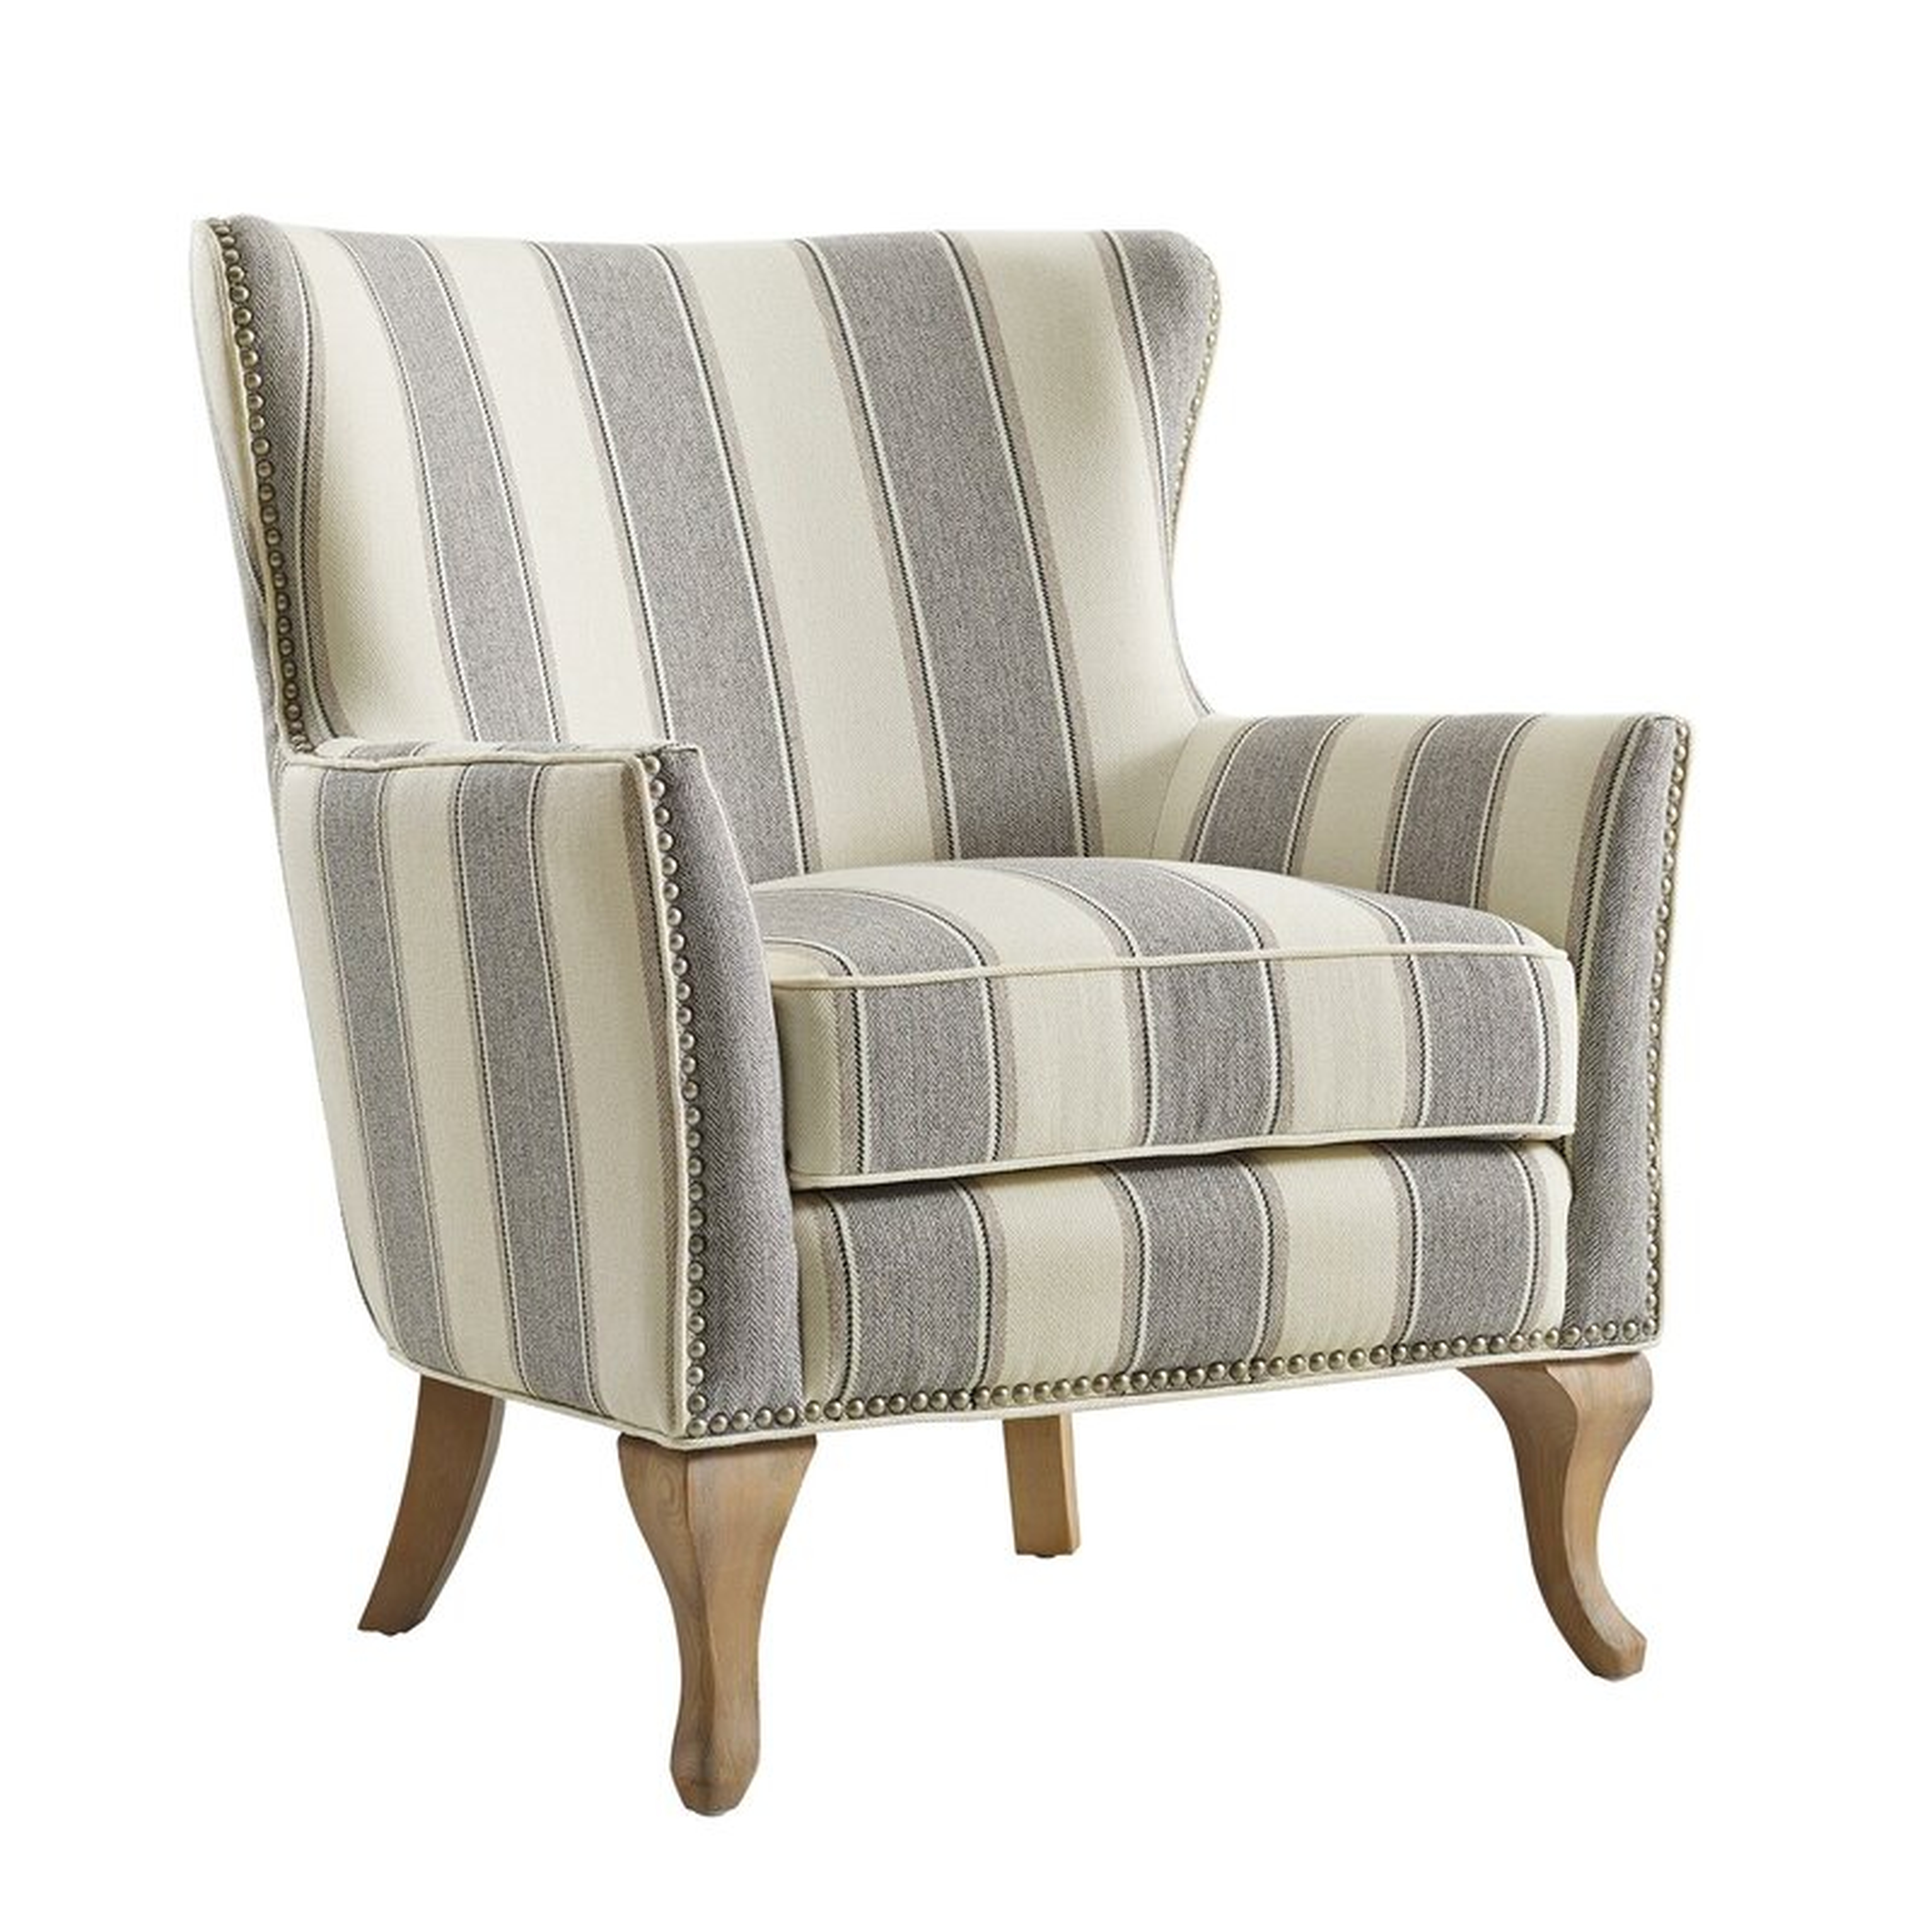 Angie 29.5'' Wide Armchair, Gray Stripped - Wayfair